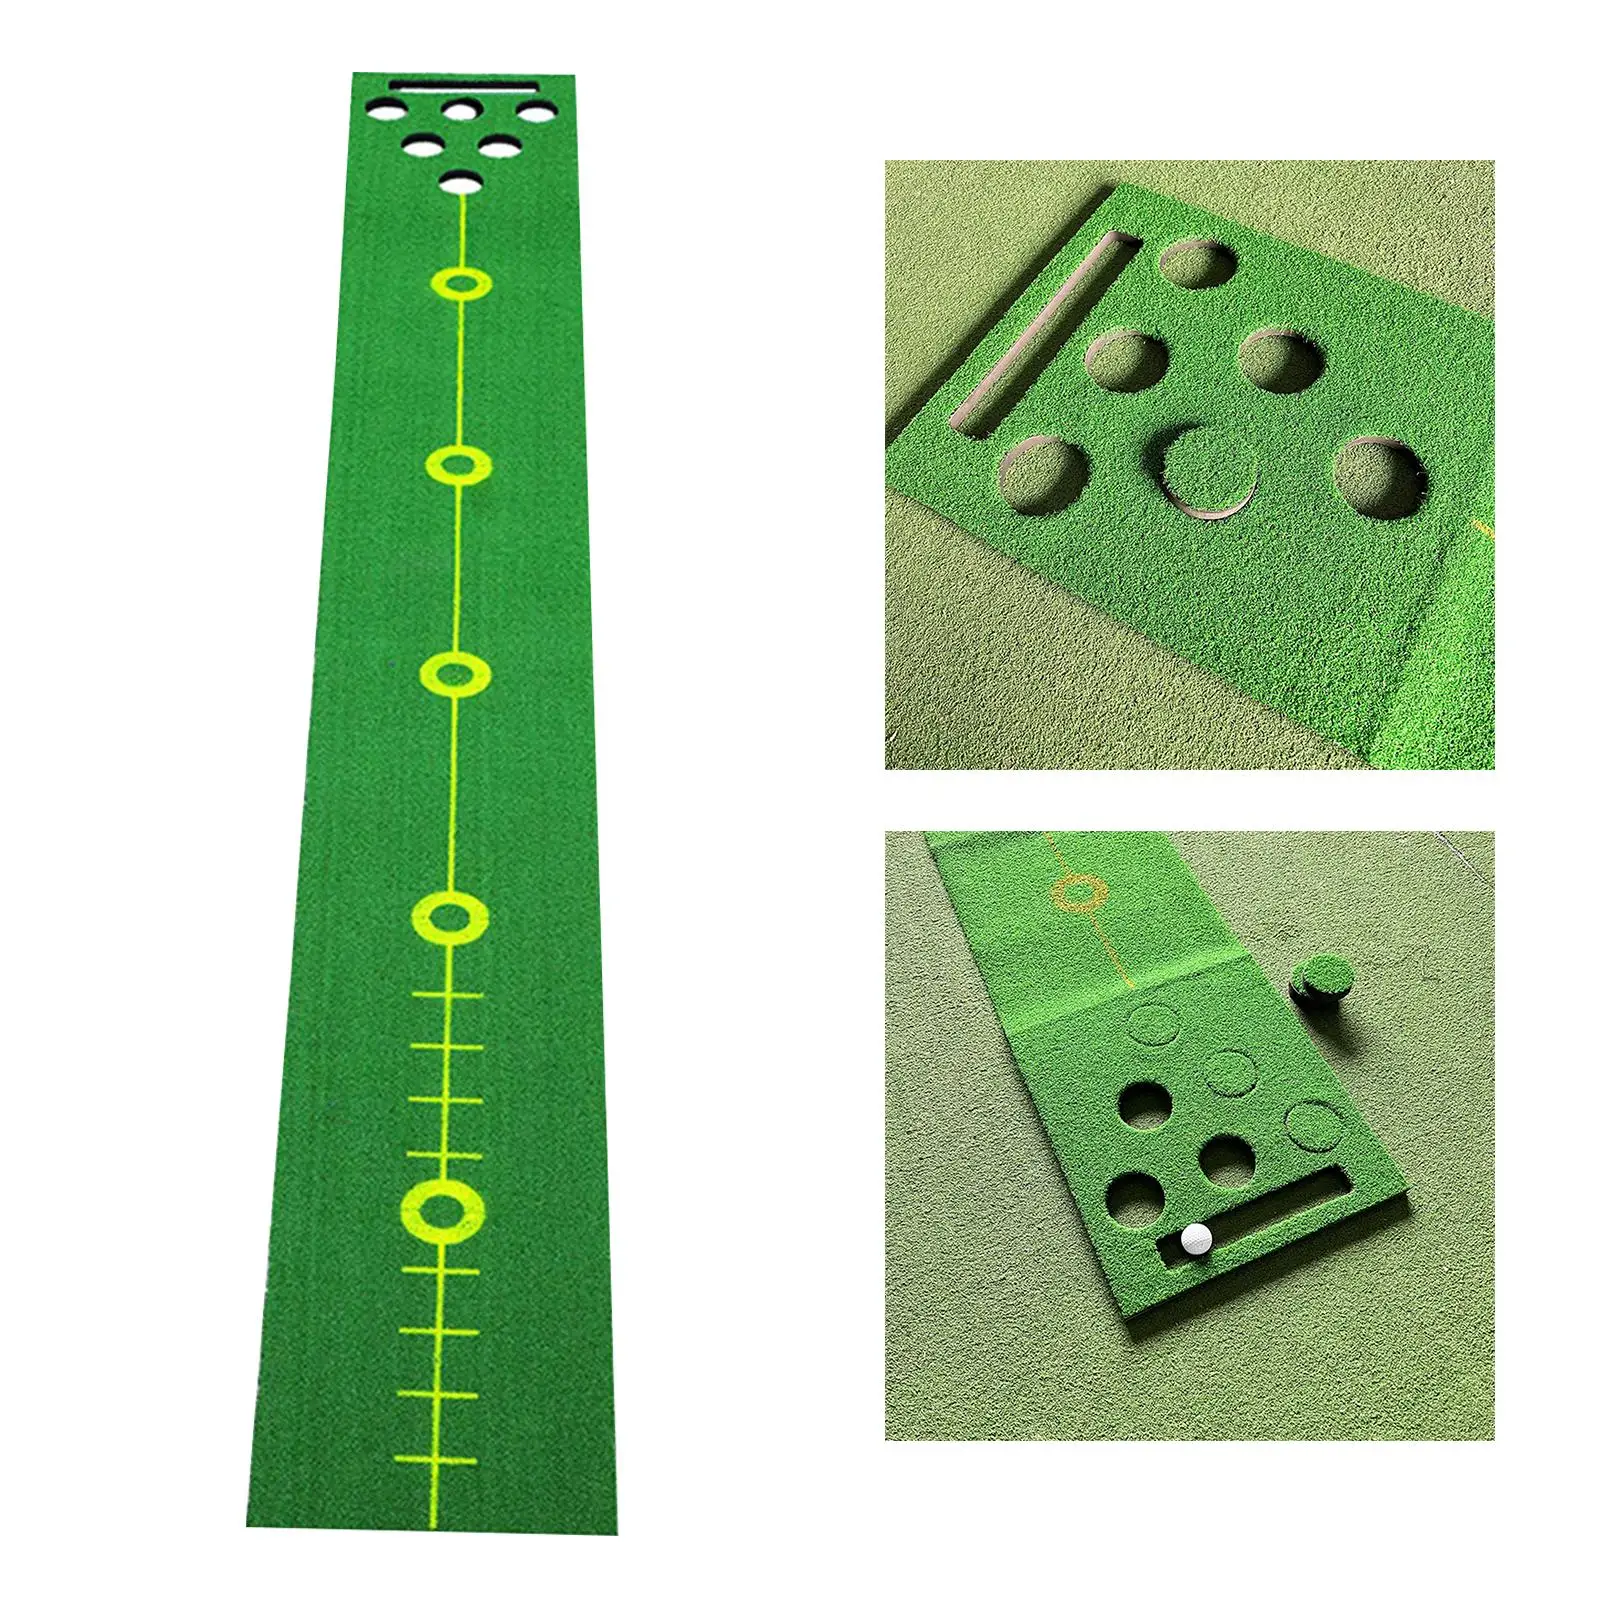 Golf Training Green Mat Swing Detection Hitting Rug Training Aid Trainer Golf Putting Practice Mat for Backyard Home